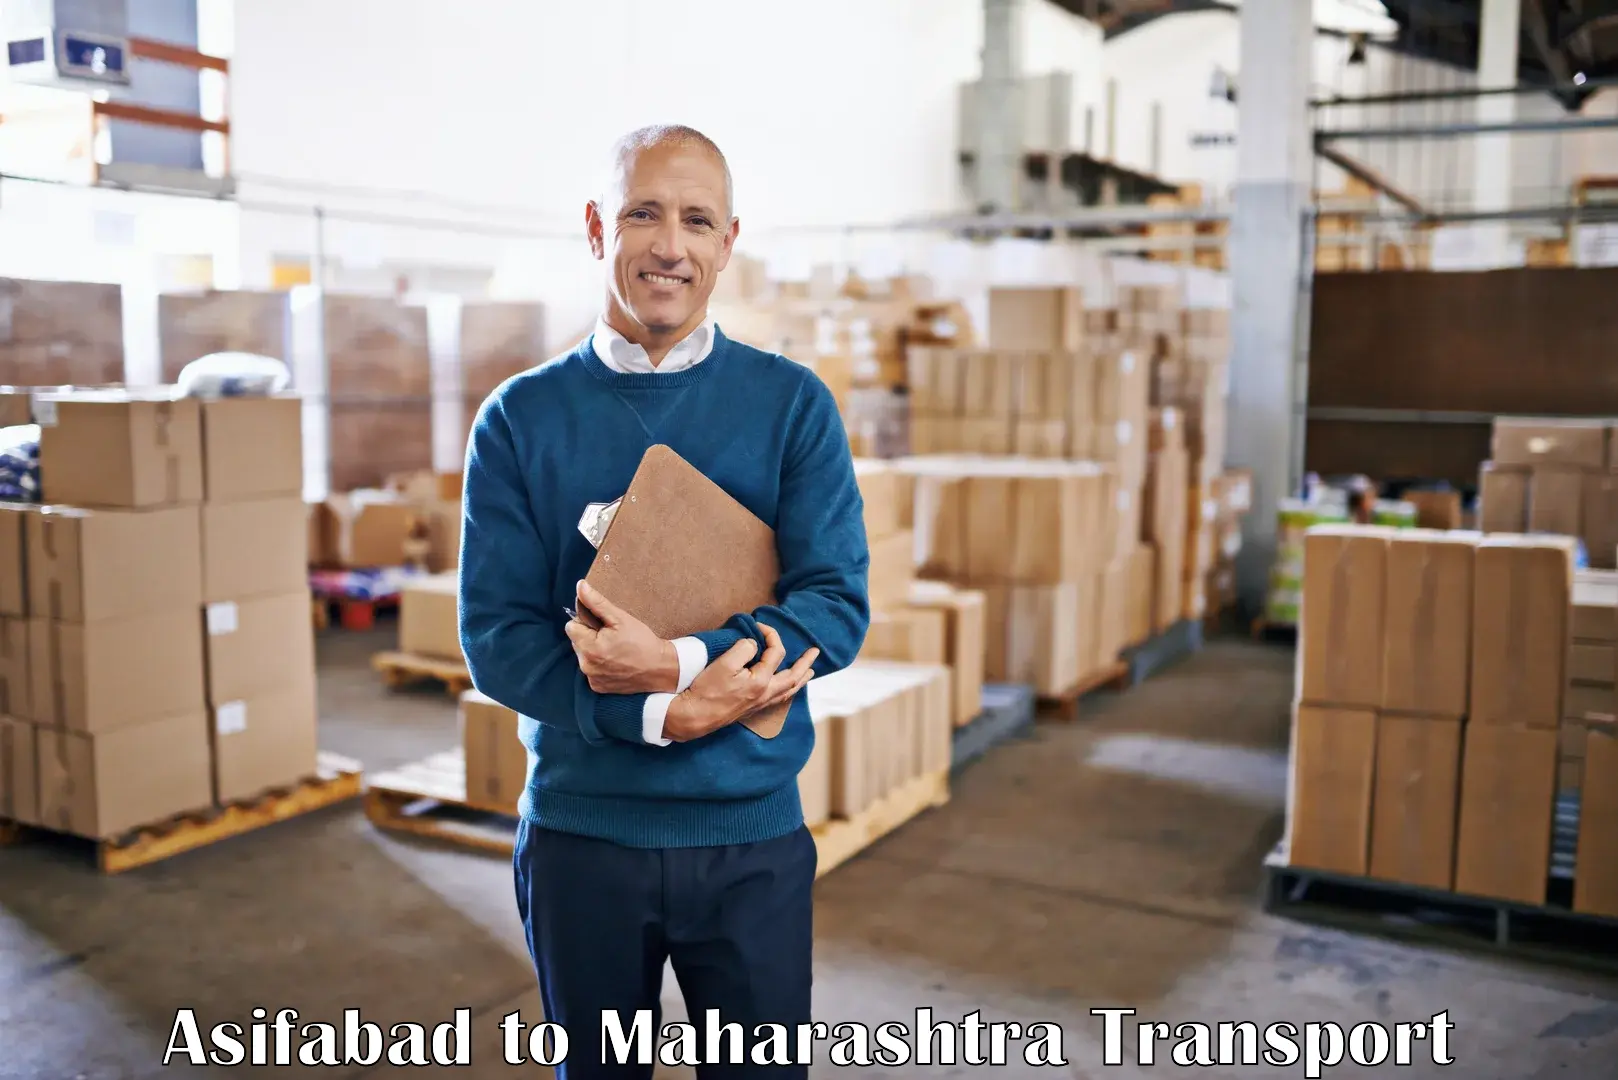 Part load transport service in India Asifabad to IIT Mumbai